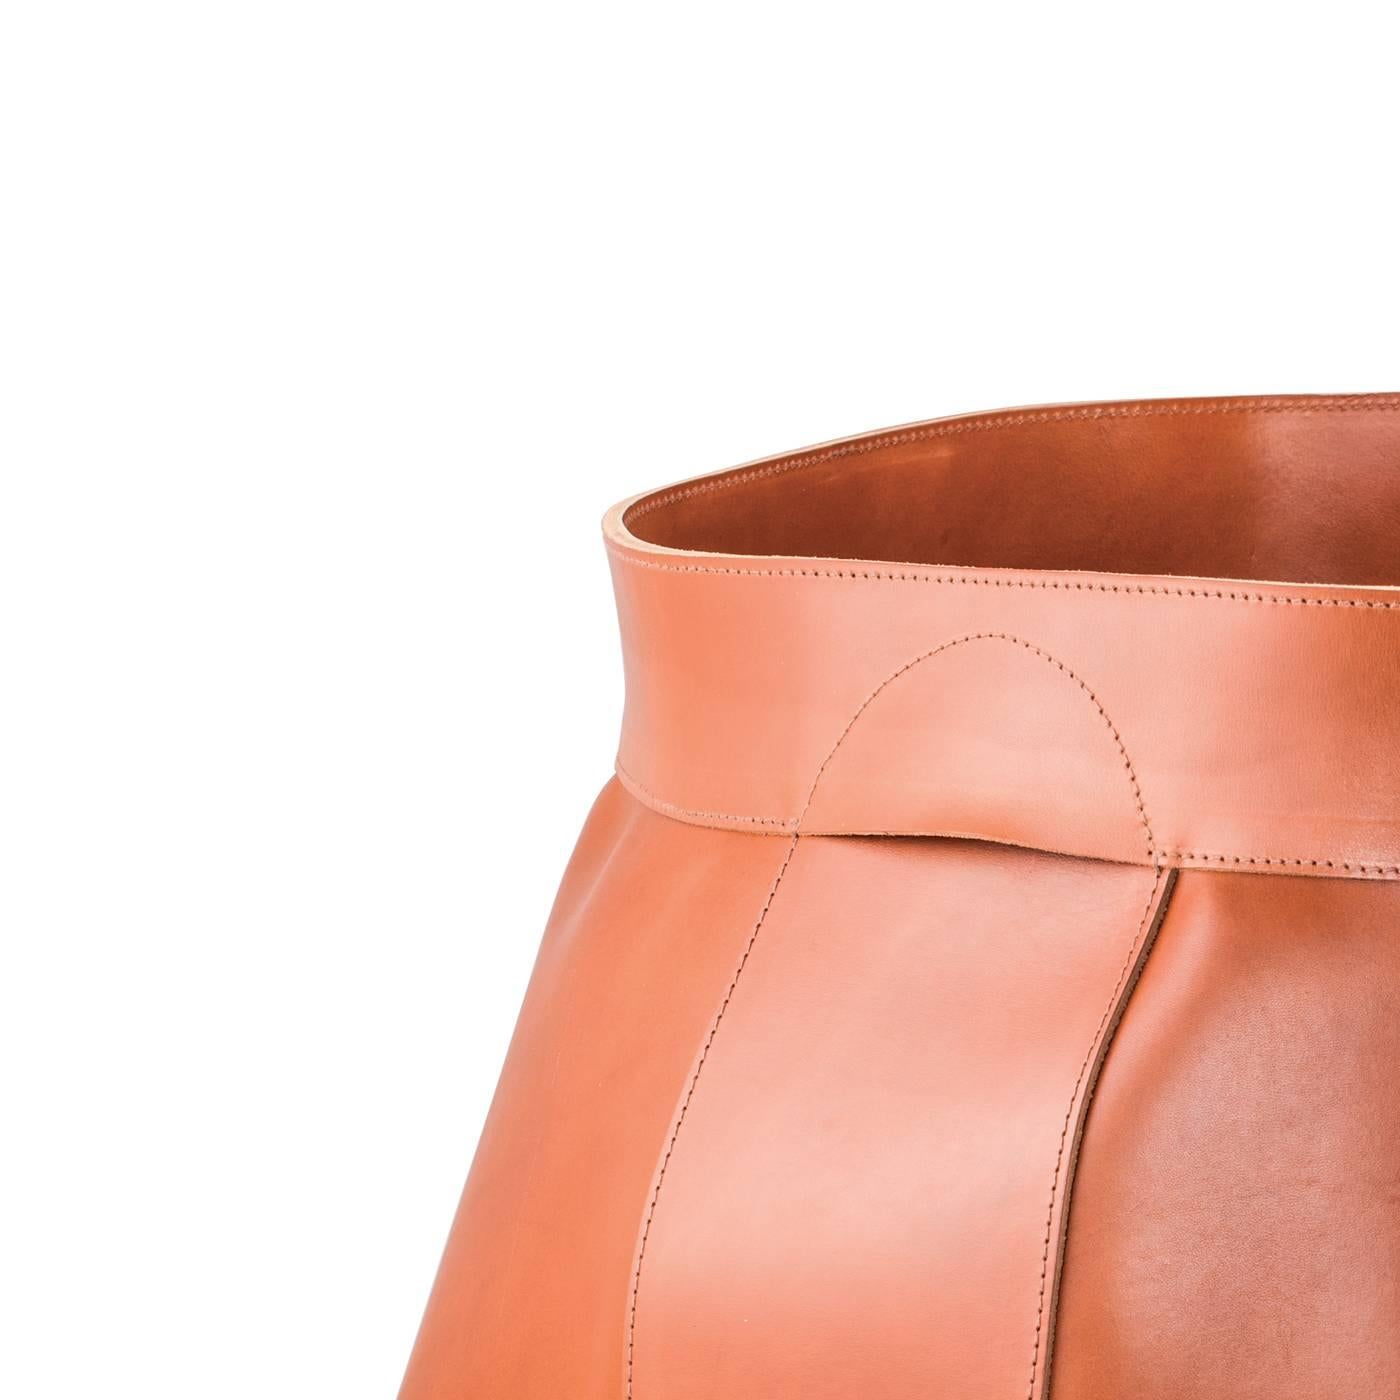 Part of the Woody series, this storage basket is crafted using artisanal methods and the finest leather, which was dyed using vegetable pigments to create a soft and durable texture. The result is a deep orange glow that enriches the unique